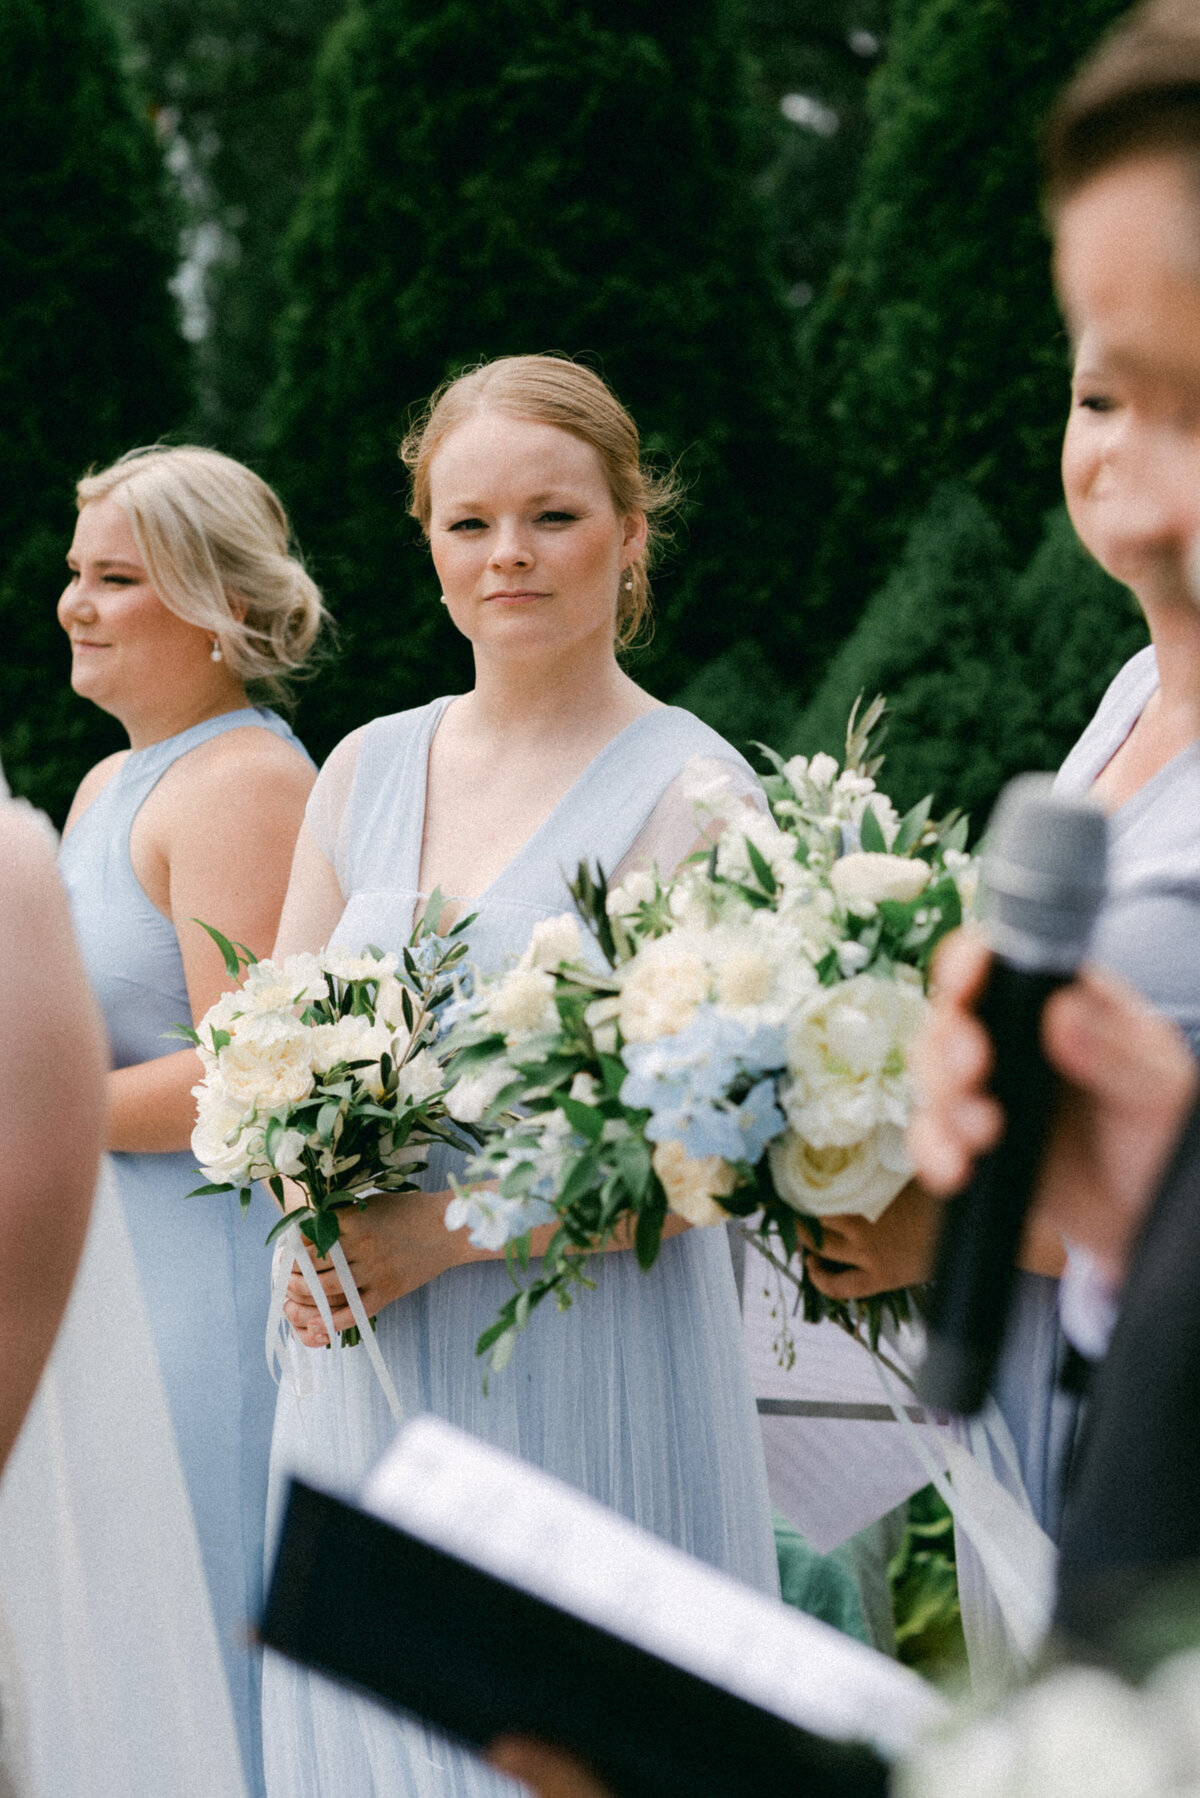 Bridesmaid in the wedding ceremony in an image photographed by wedding photographer Hannika Gabrielsson.